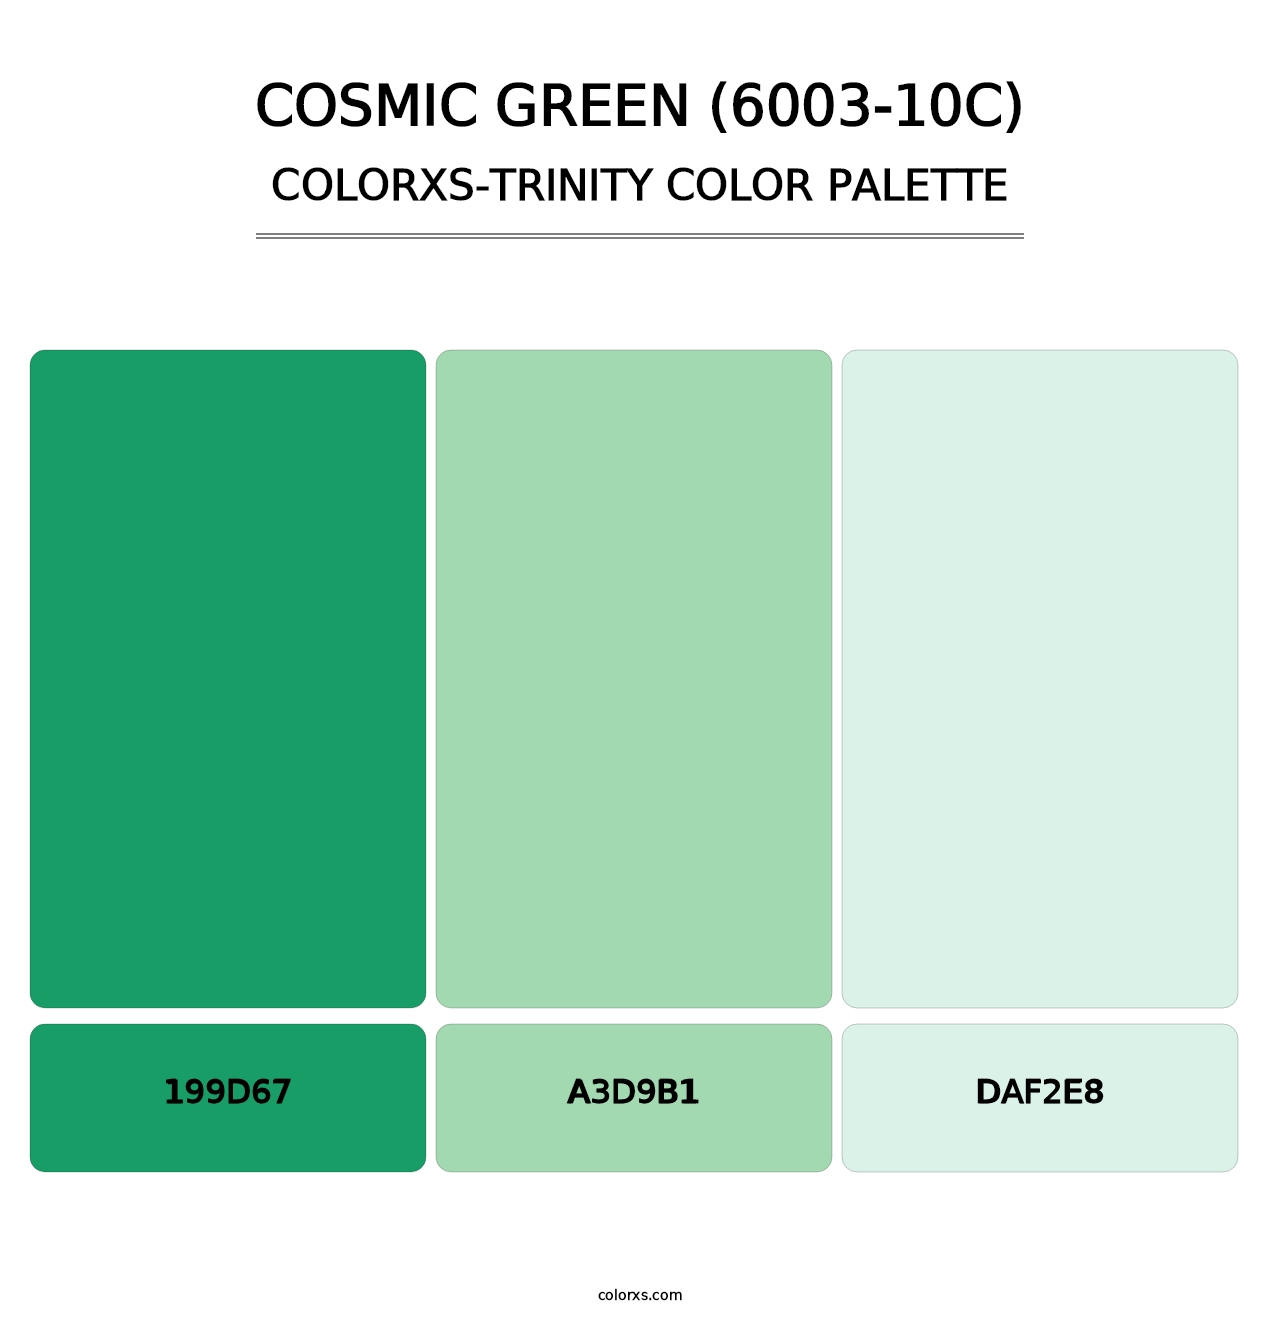 Cosmic Green (6003-10C) - Colorxs Trinity Palette